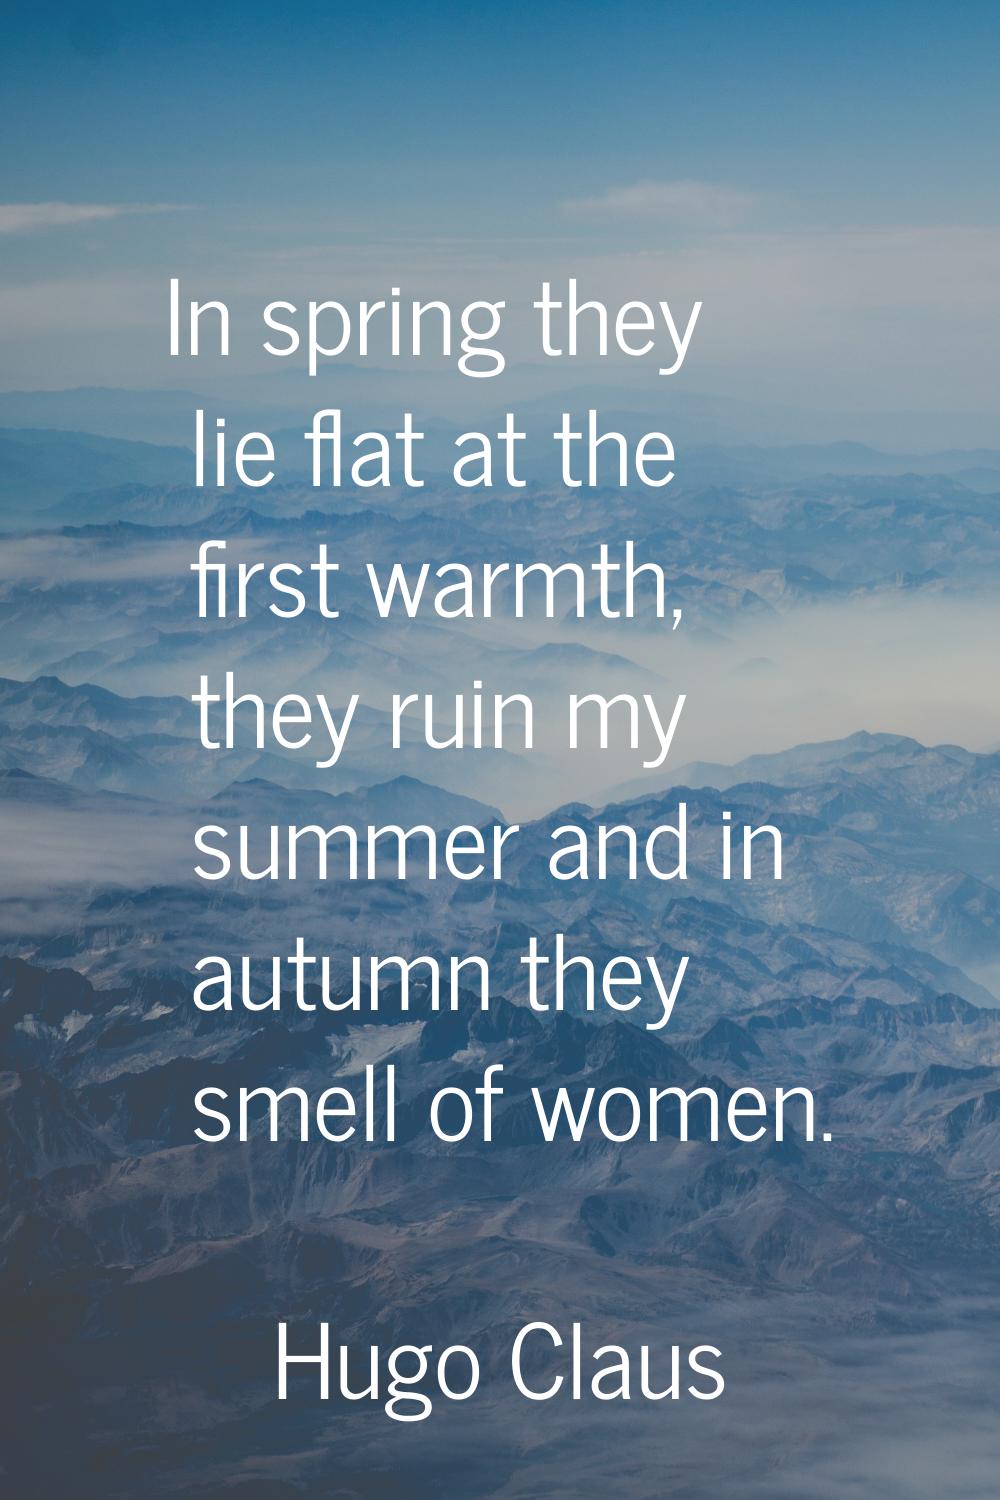 In spring they lie flat at the first warmth, they ruin my summer and in autumn they smell of women.